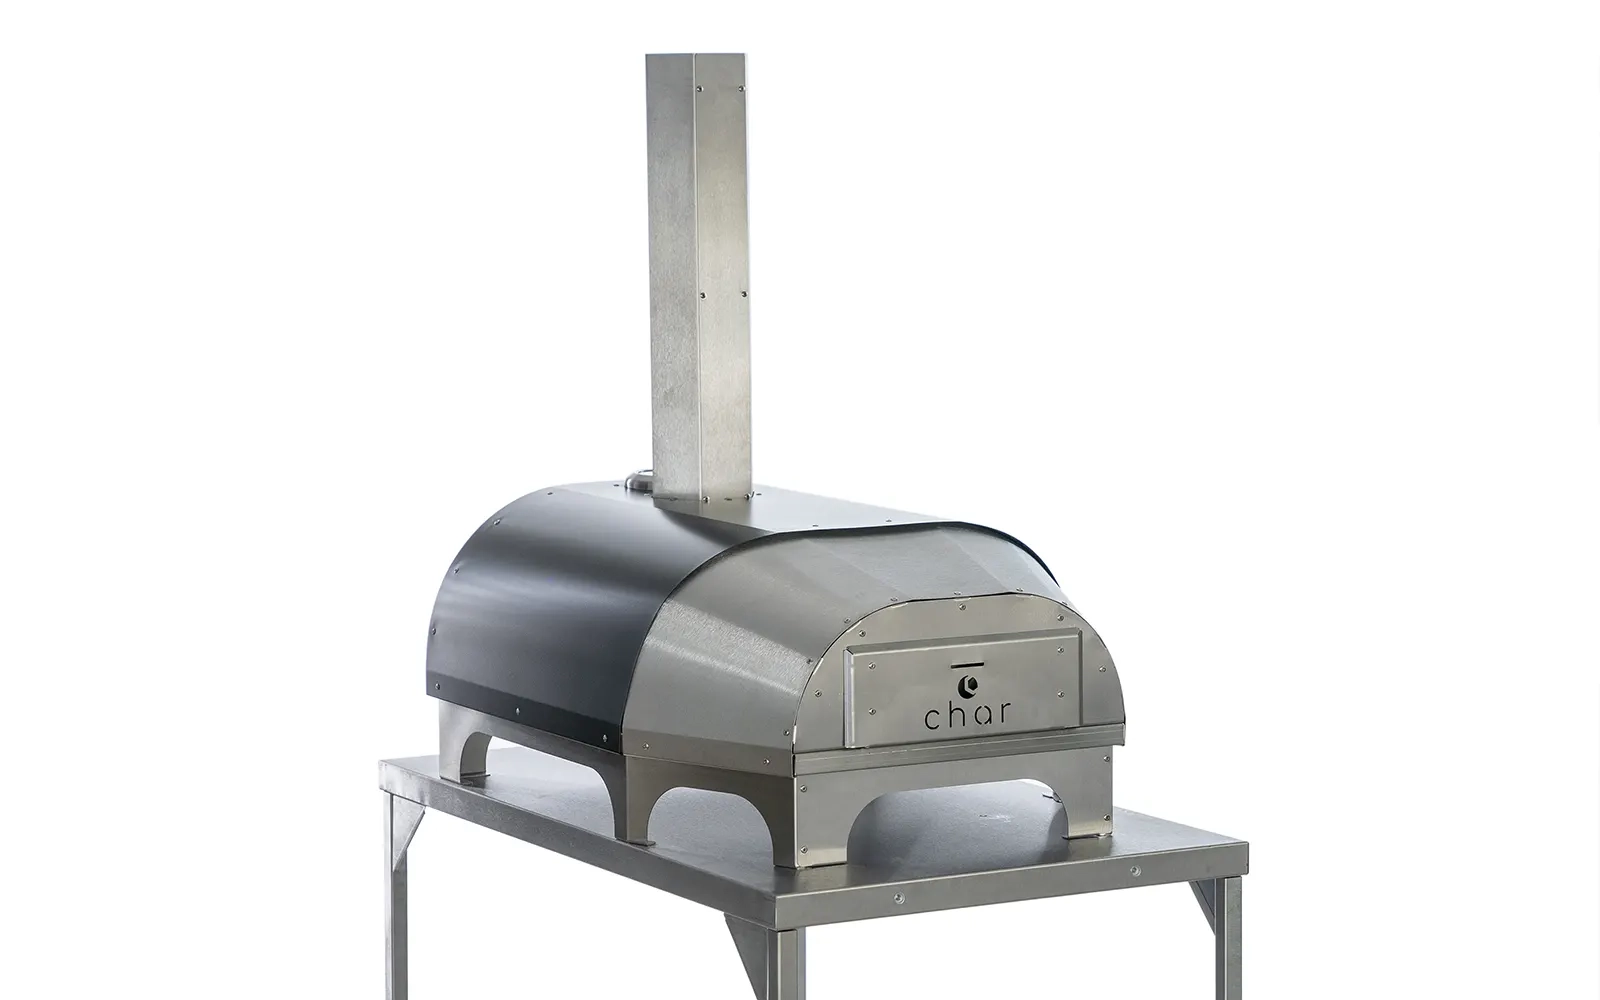 Rear of The No.16 pizza oven against a white background